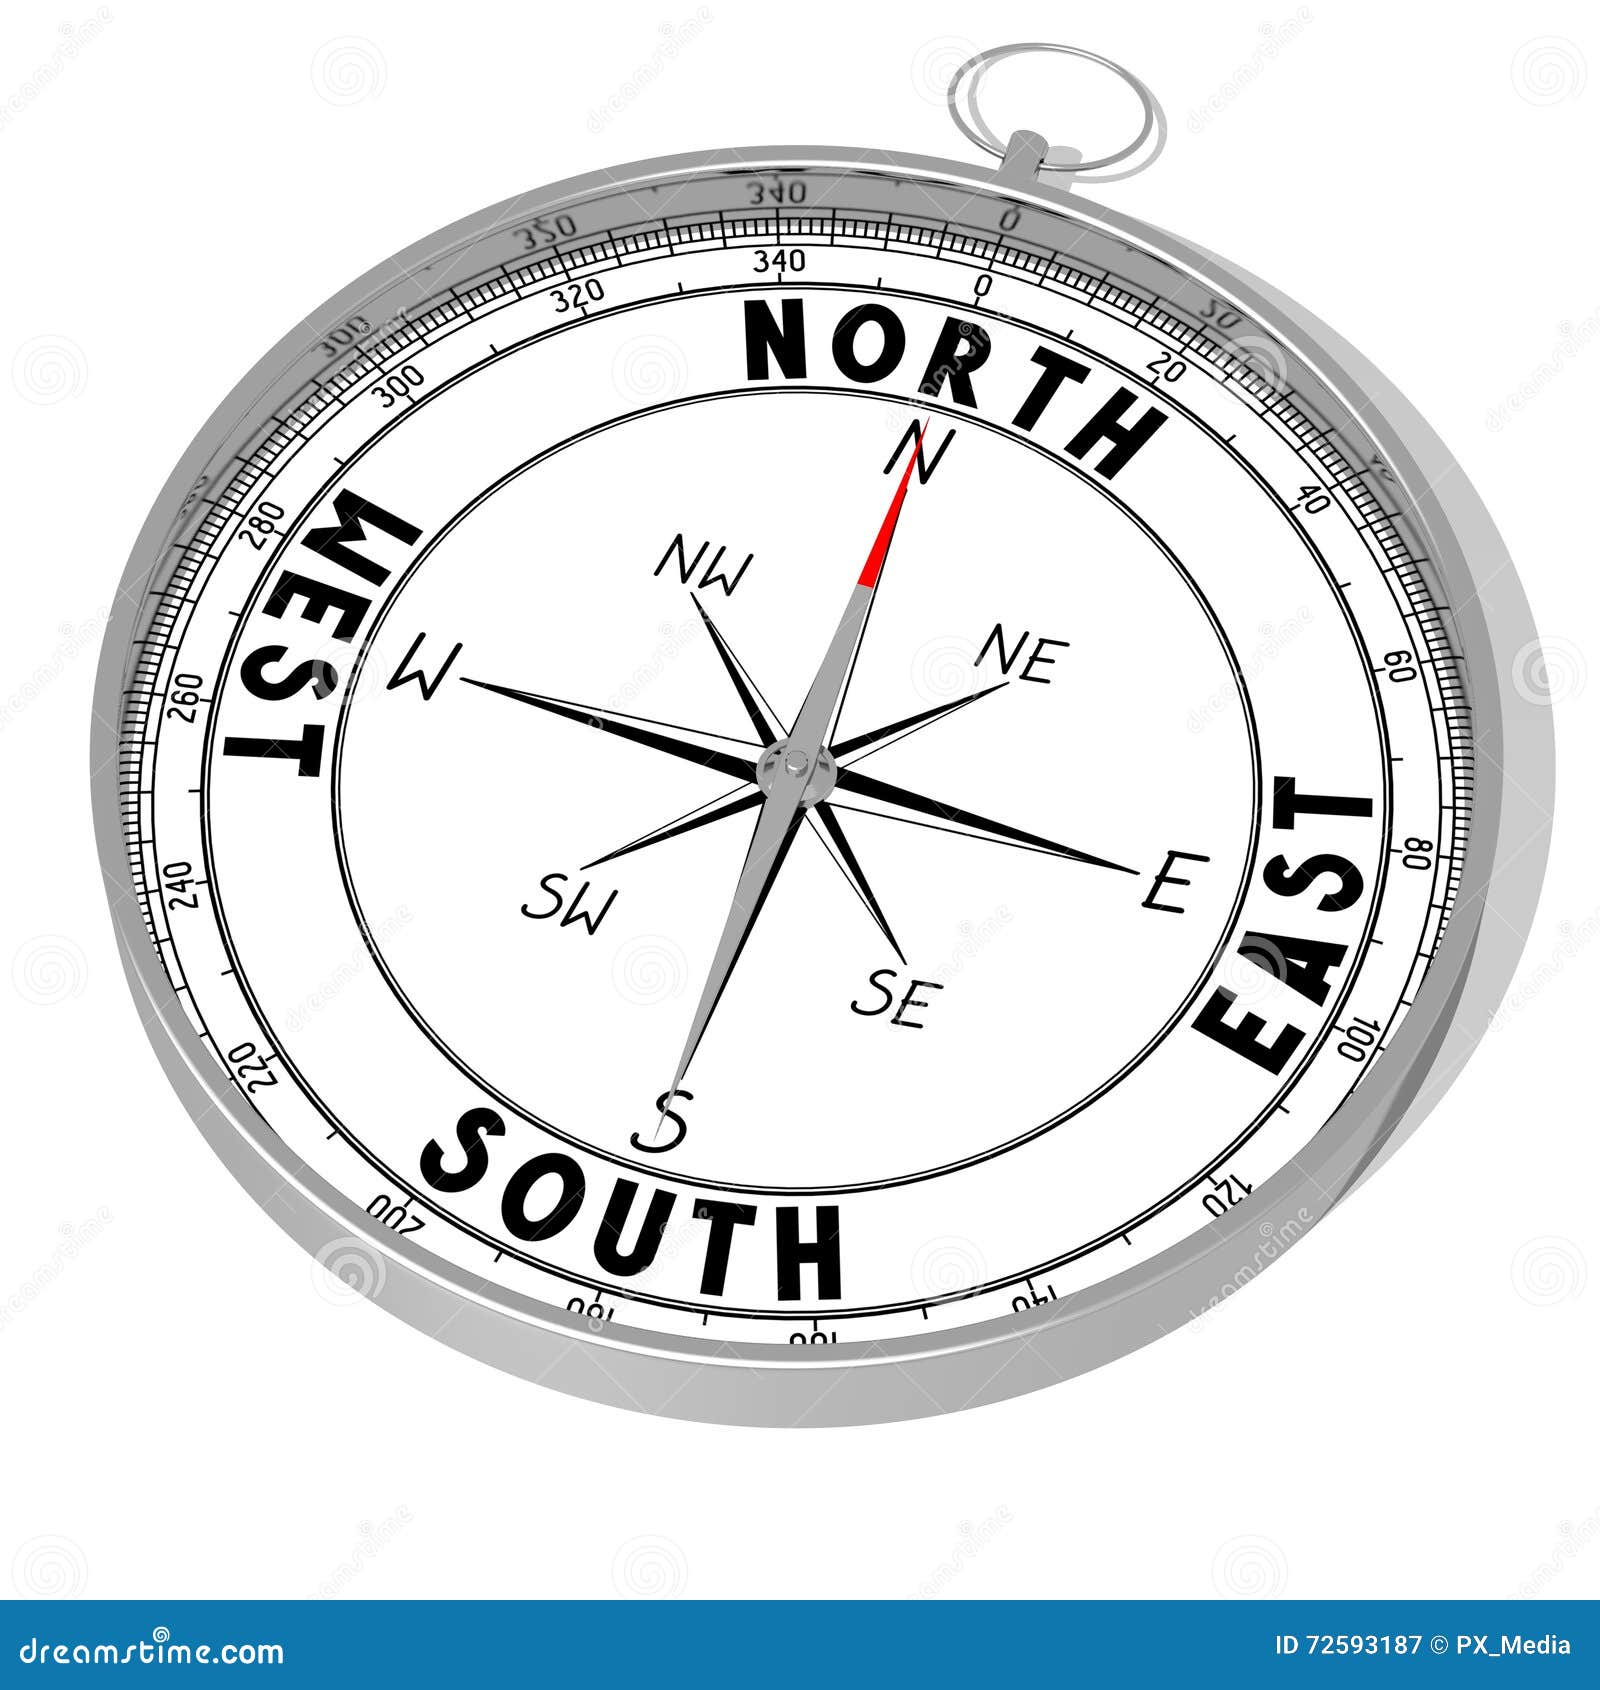 3d Compass North South East West 4 Directions Stock Illustration Illustration Of Objects Travel 72593187